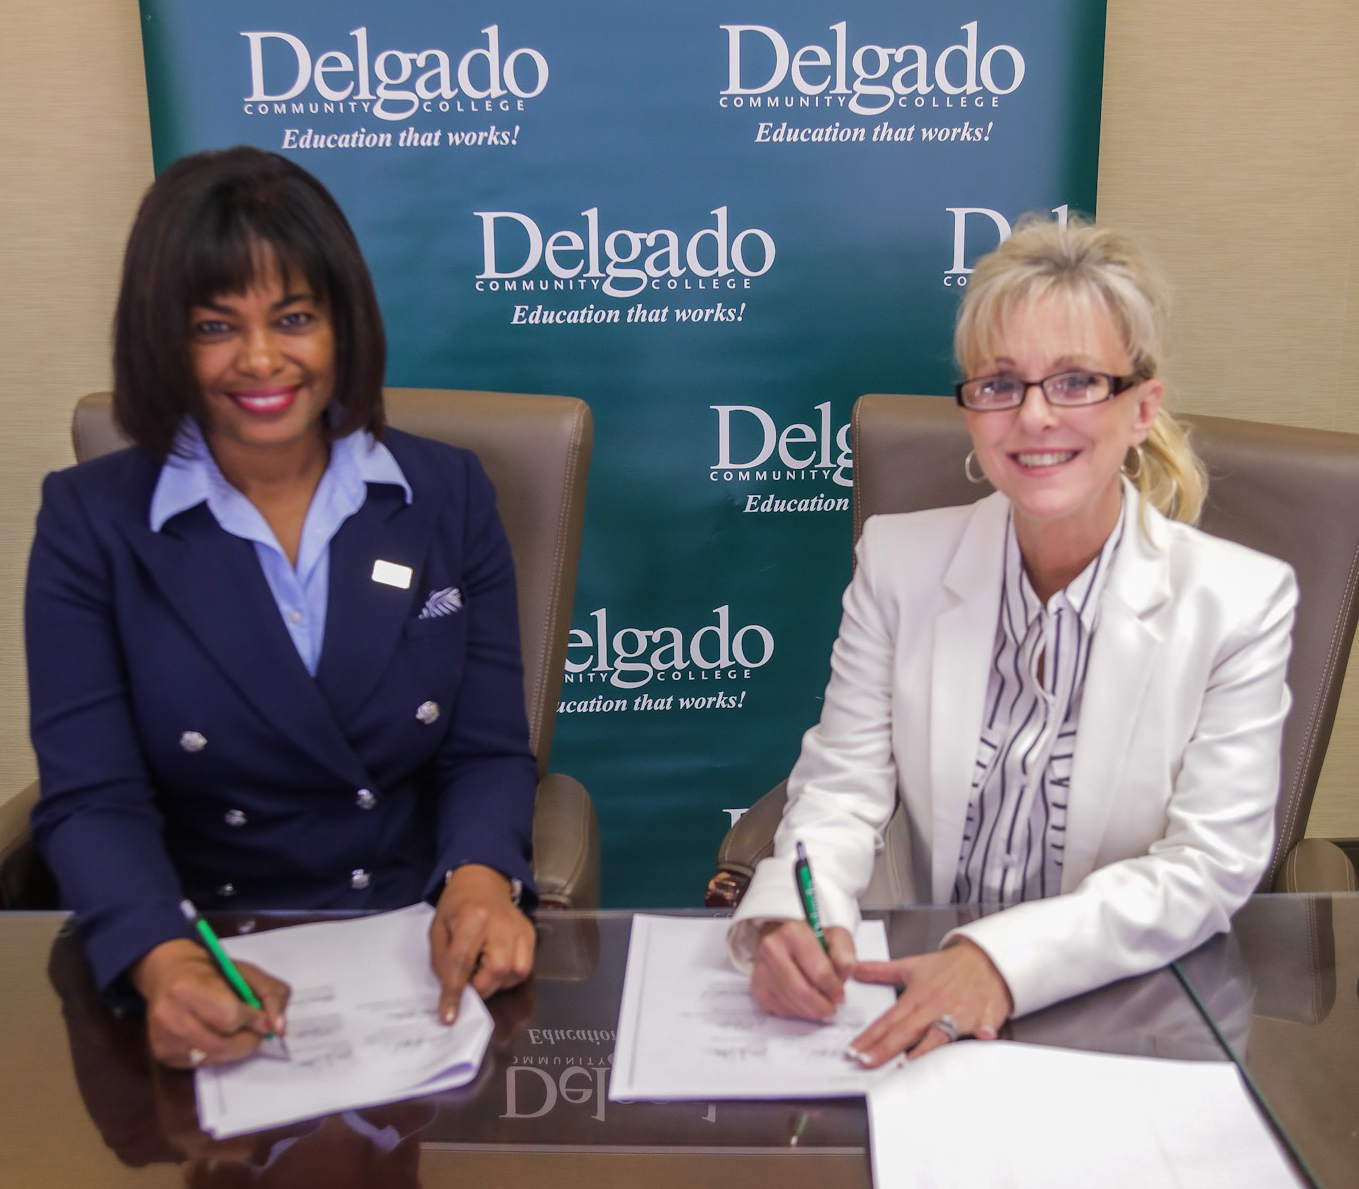 A new transfer agreement for Delgado Community College Business Administration graduates to earn bachelor’s degrees was signed by Delgado Chancellor Joan Davis, left, and Gina Fedell, right, Assistant Director for Academic Alliances in the Southern New Hampshire University College of Online and Continuing Education.